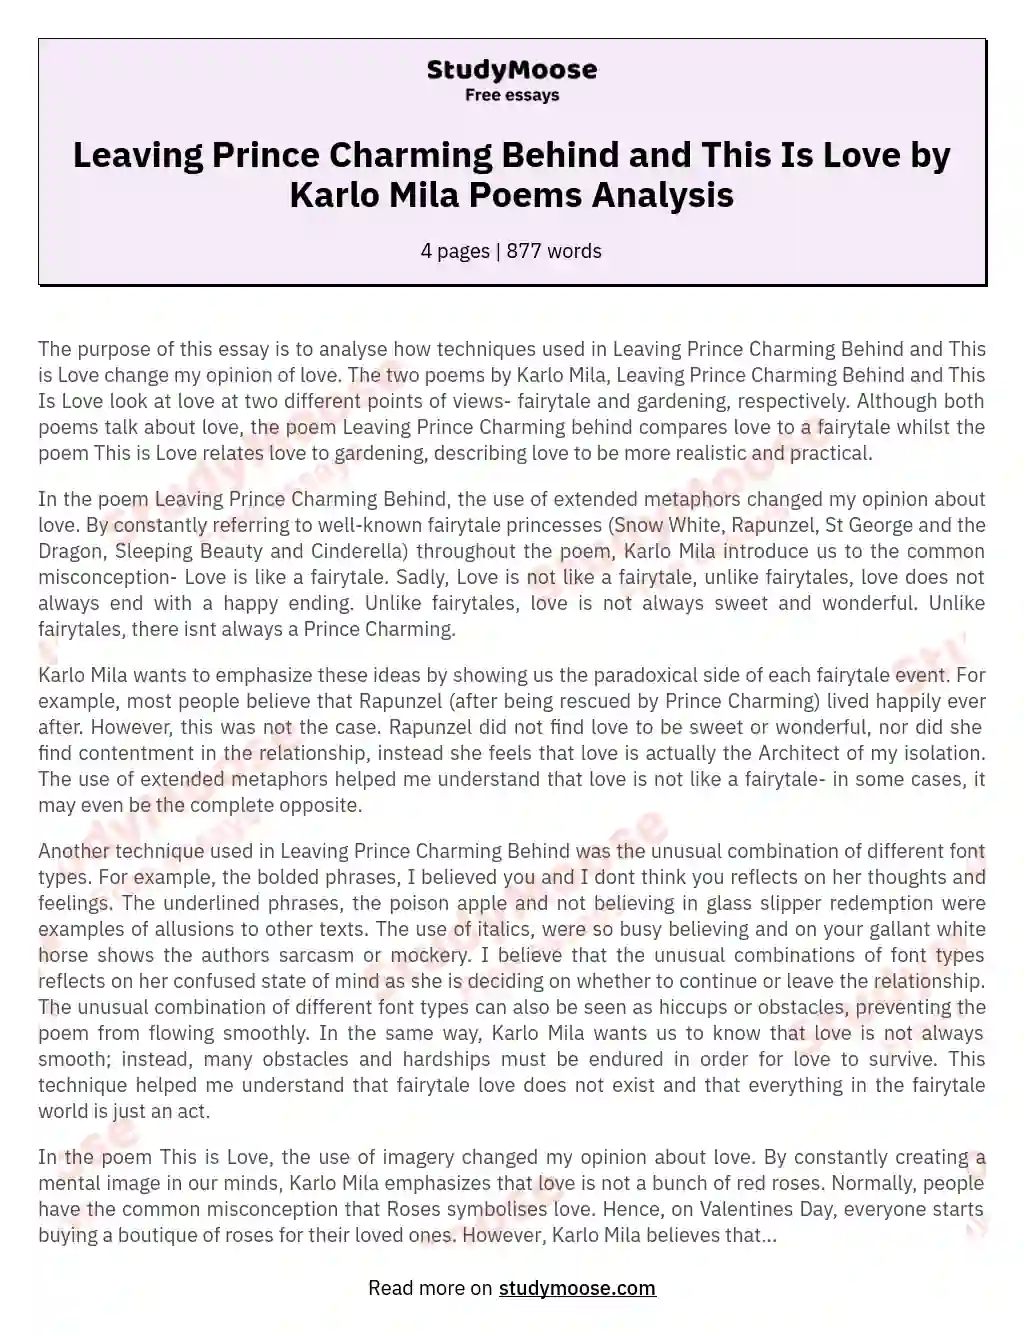 Leaving Prince Charming Behind and This Is Love by Karlo Mila Poems Analysis